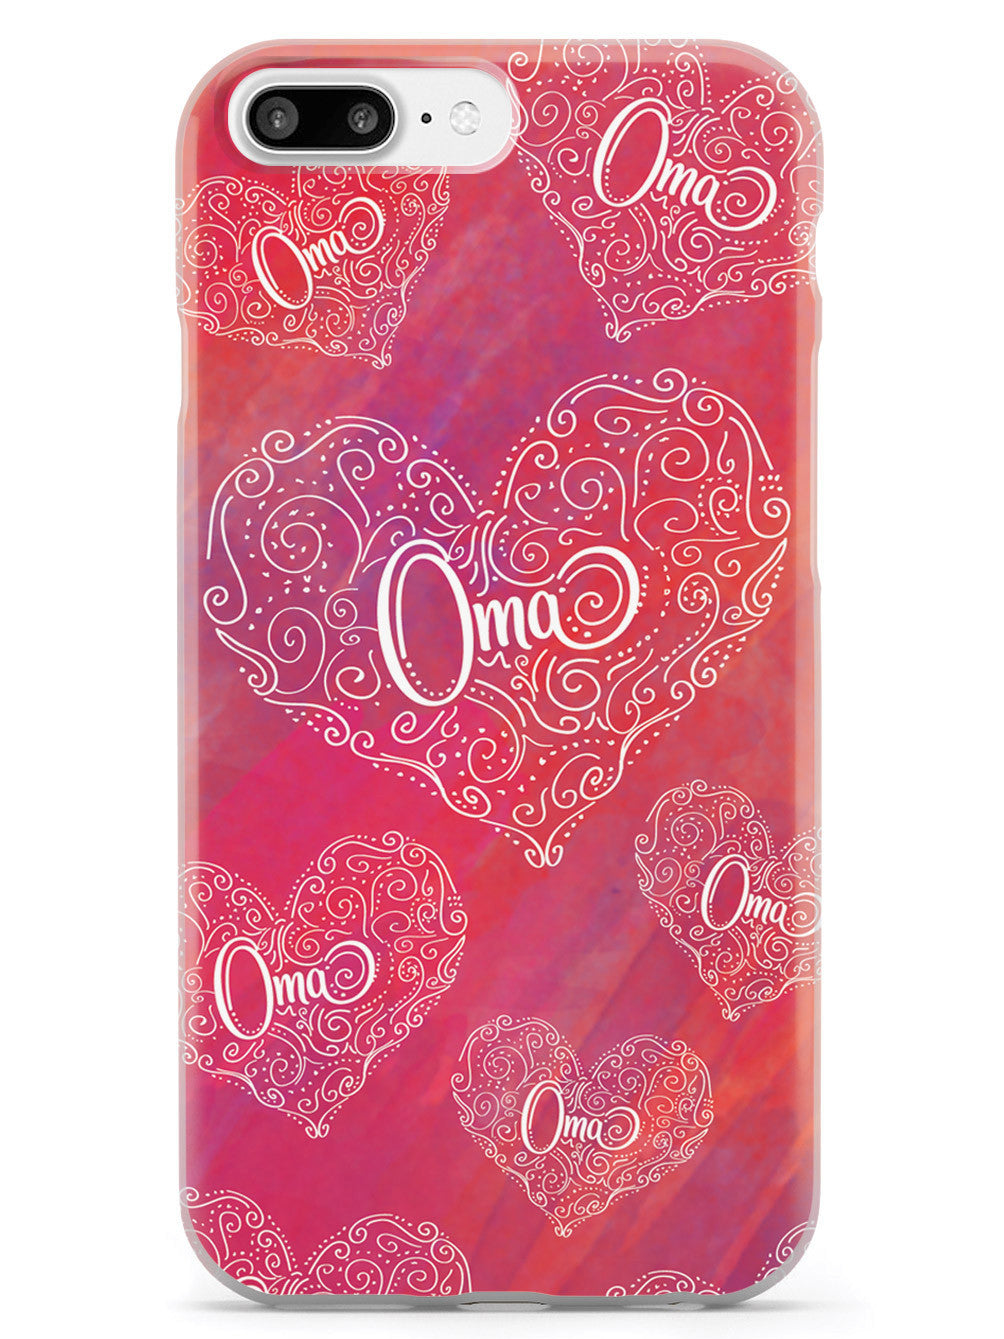 Oma Doodle Hearts - Pink Case